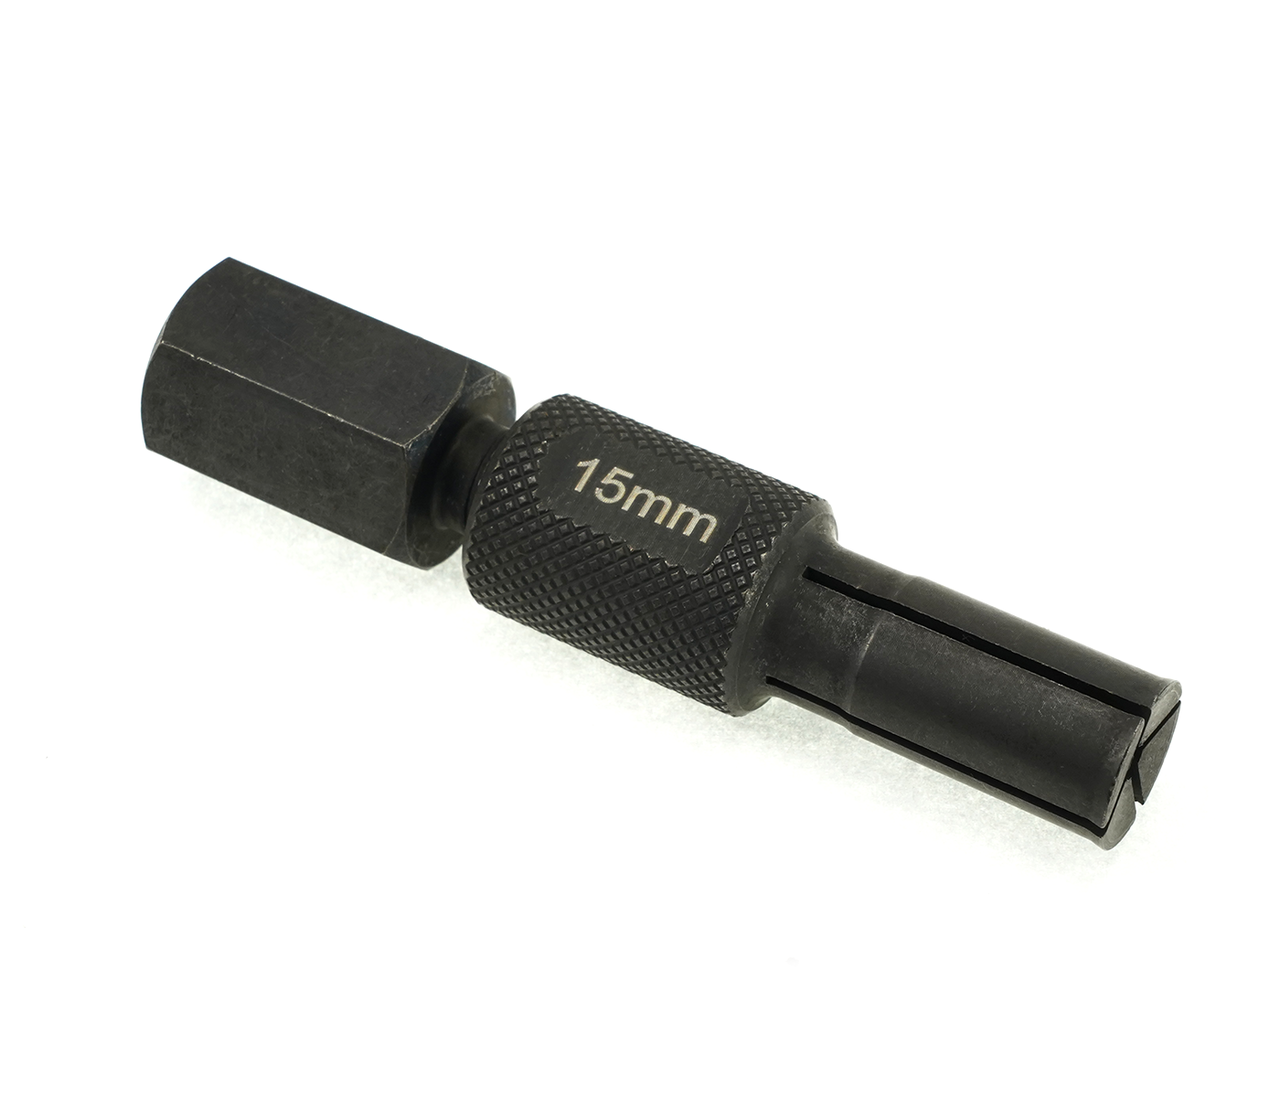 Enduro Puller 15-17mm - Black Oxide, Expanding Collet, Bearing Puller for bearings with 15-17mm IDs